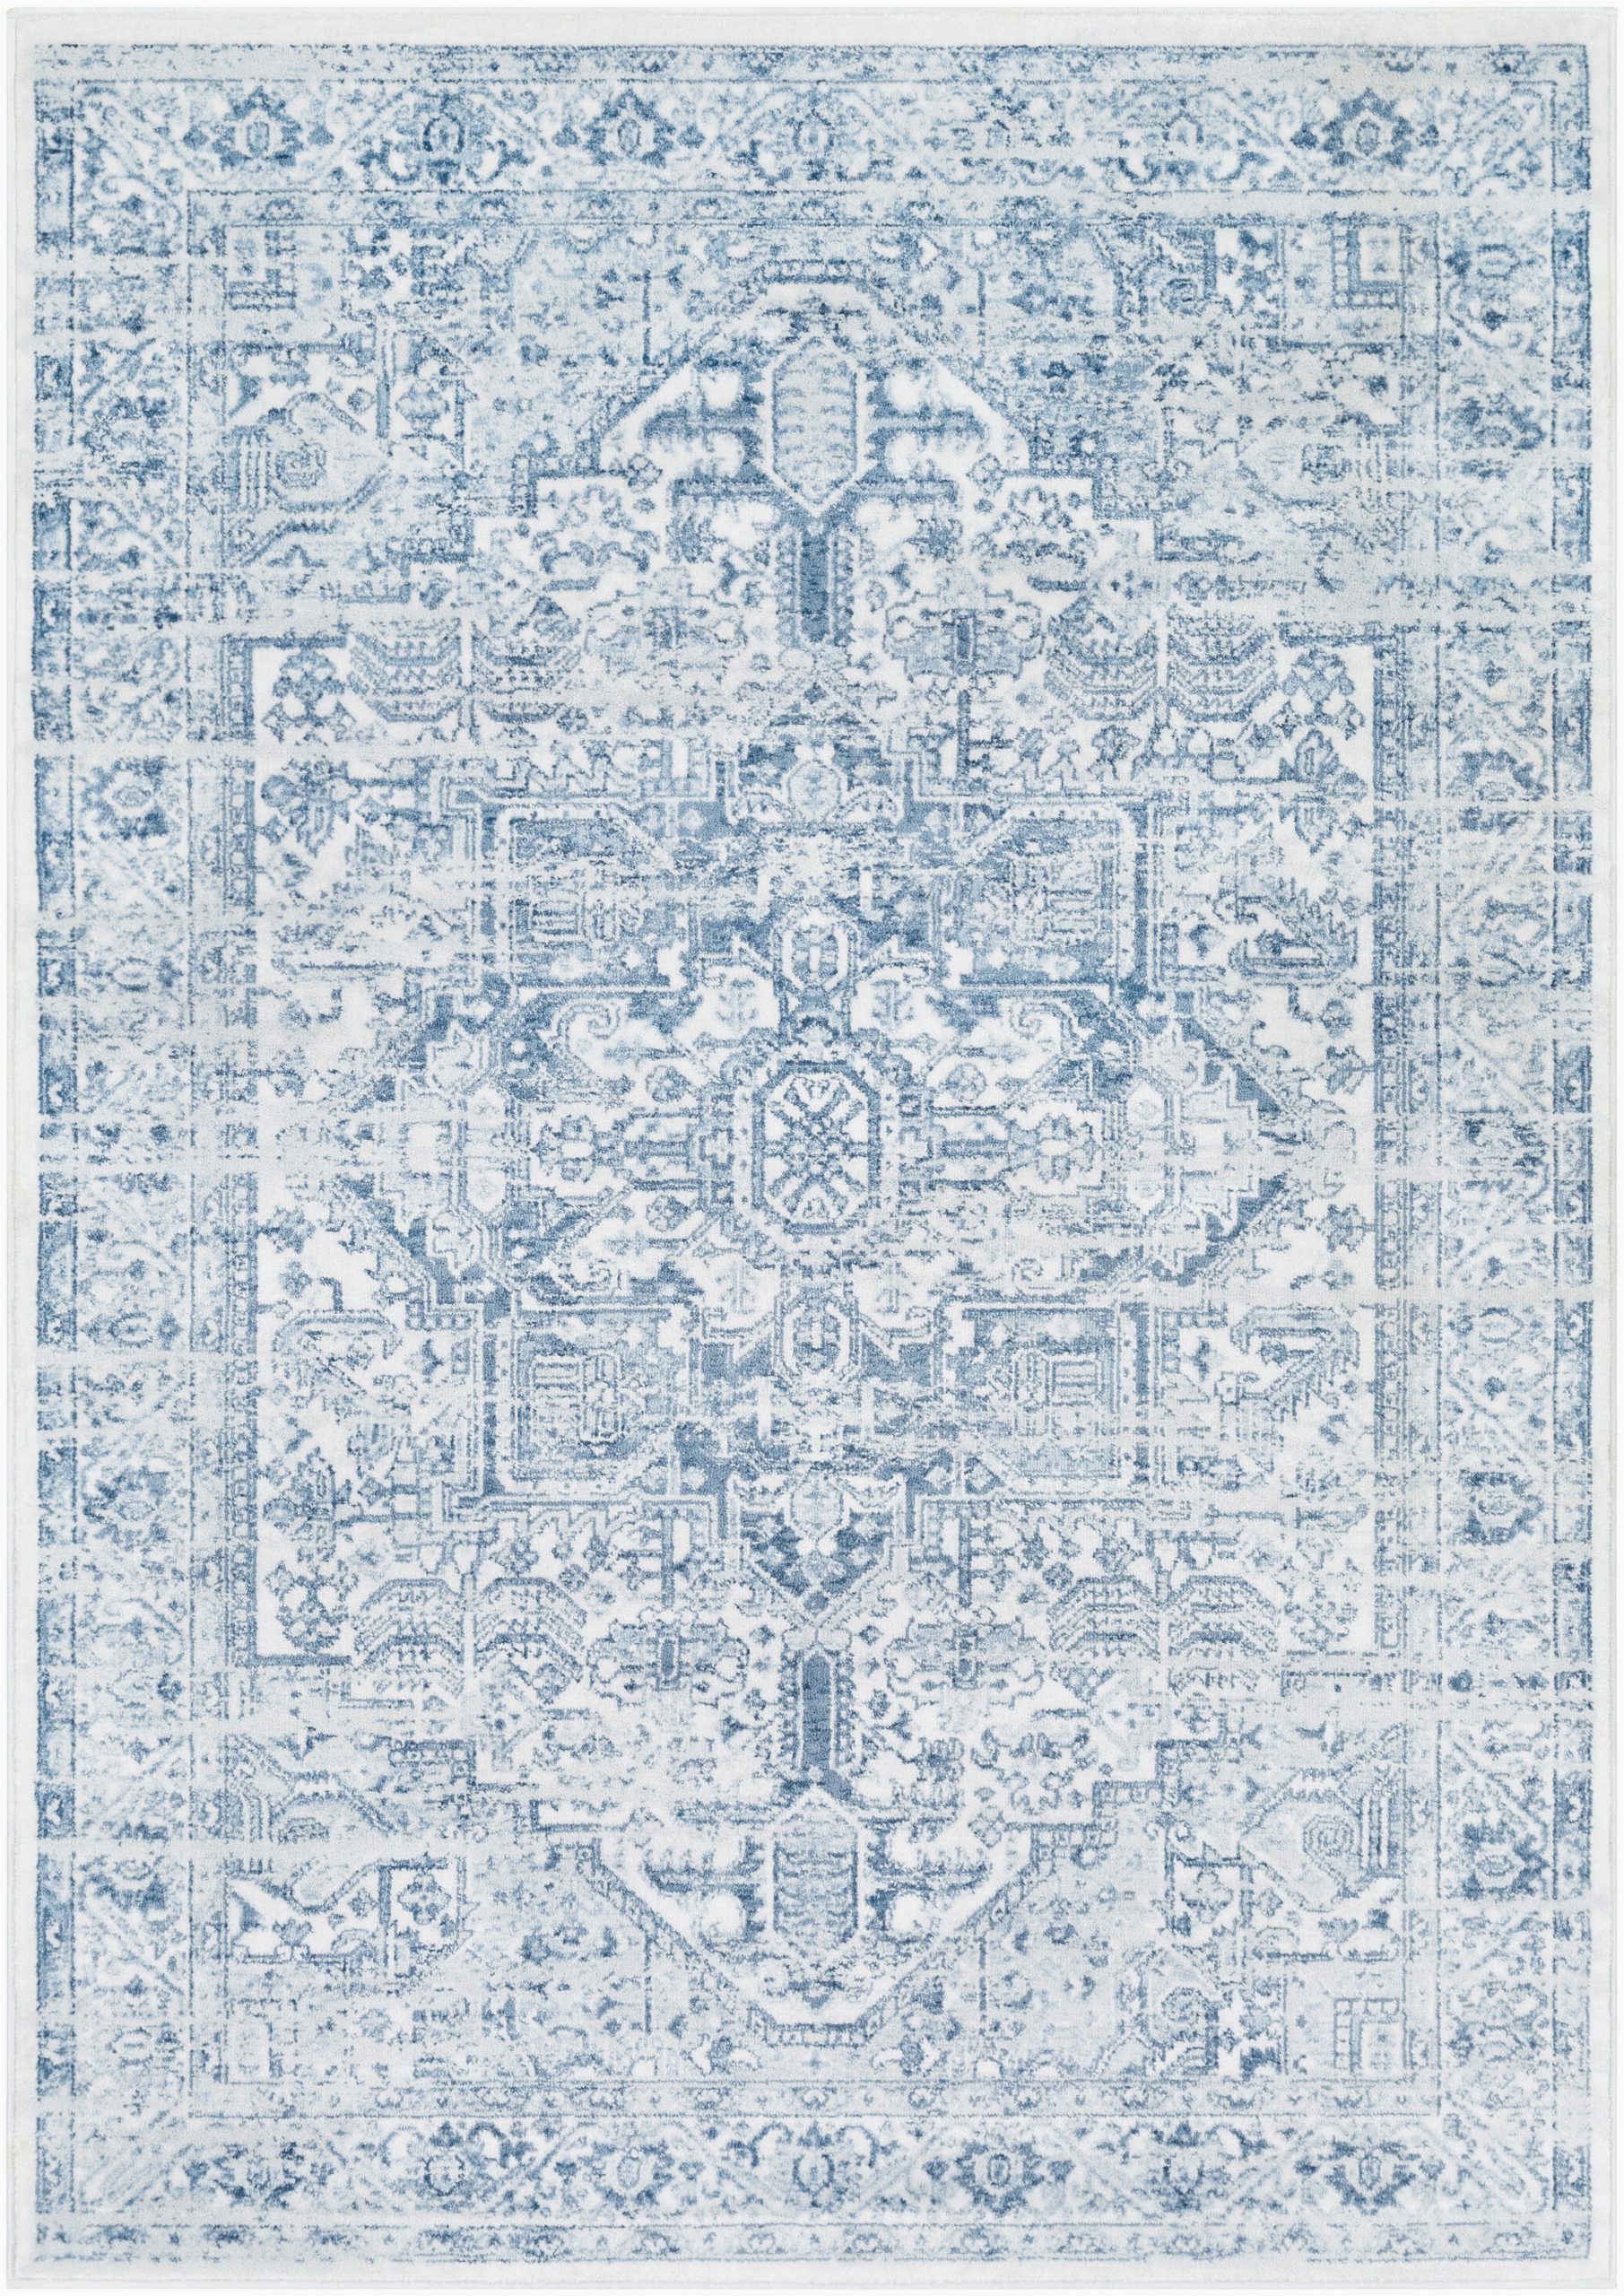 Light Blue Geometric Rug Micro Patterns Make Up One Larger yet Delicate Motif On This